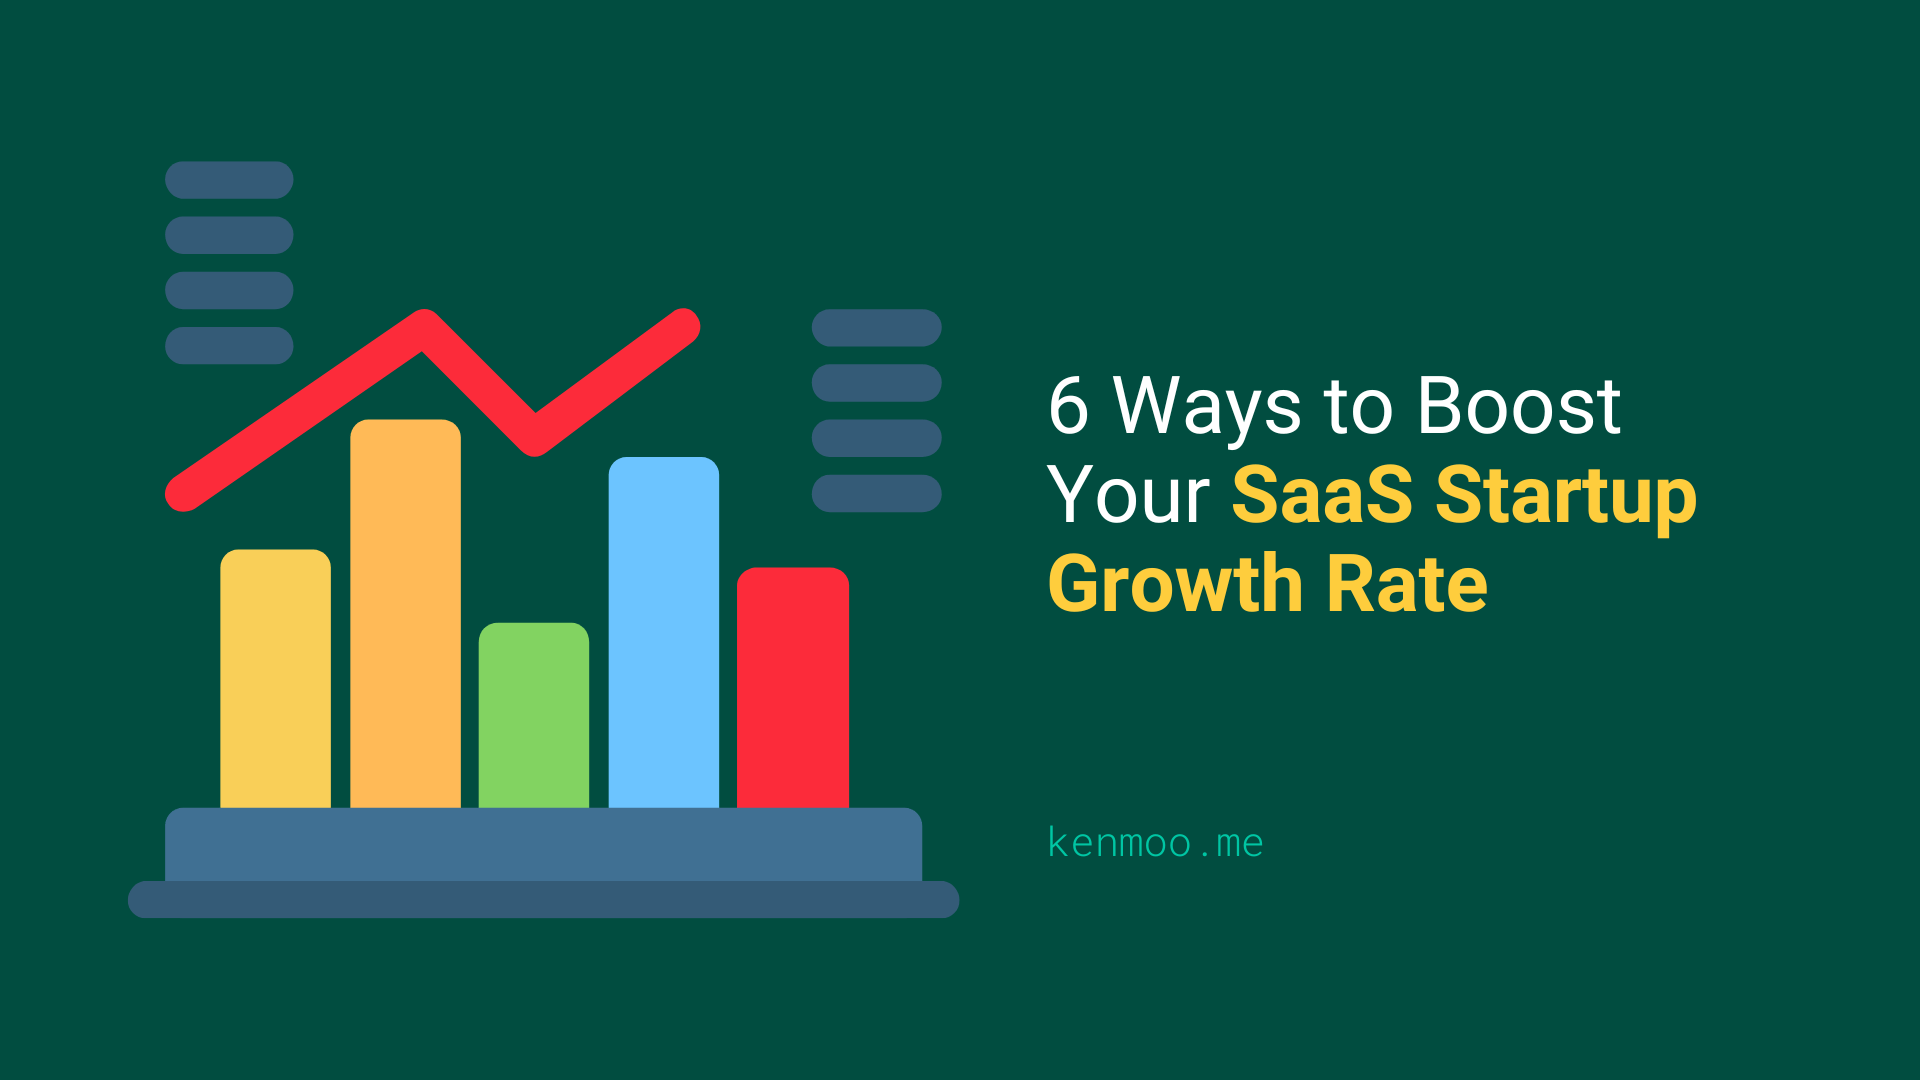 6 Ways to Boost Your SaaS Startup Growth Rate